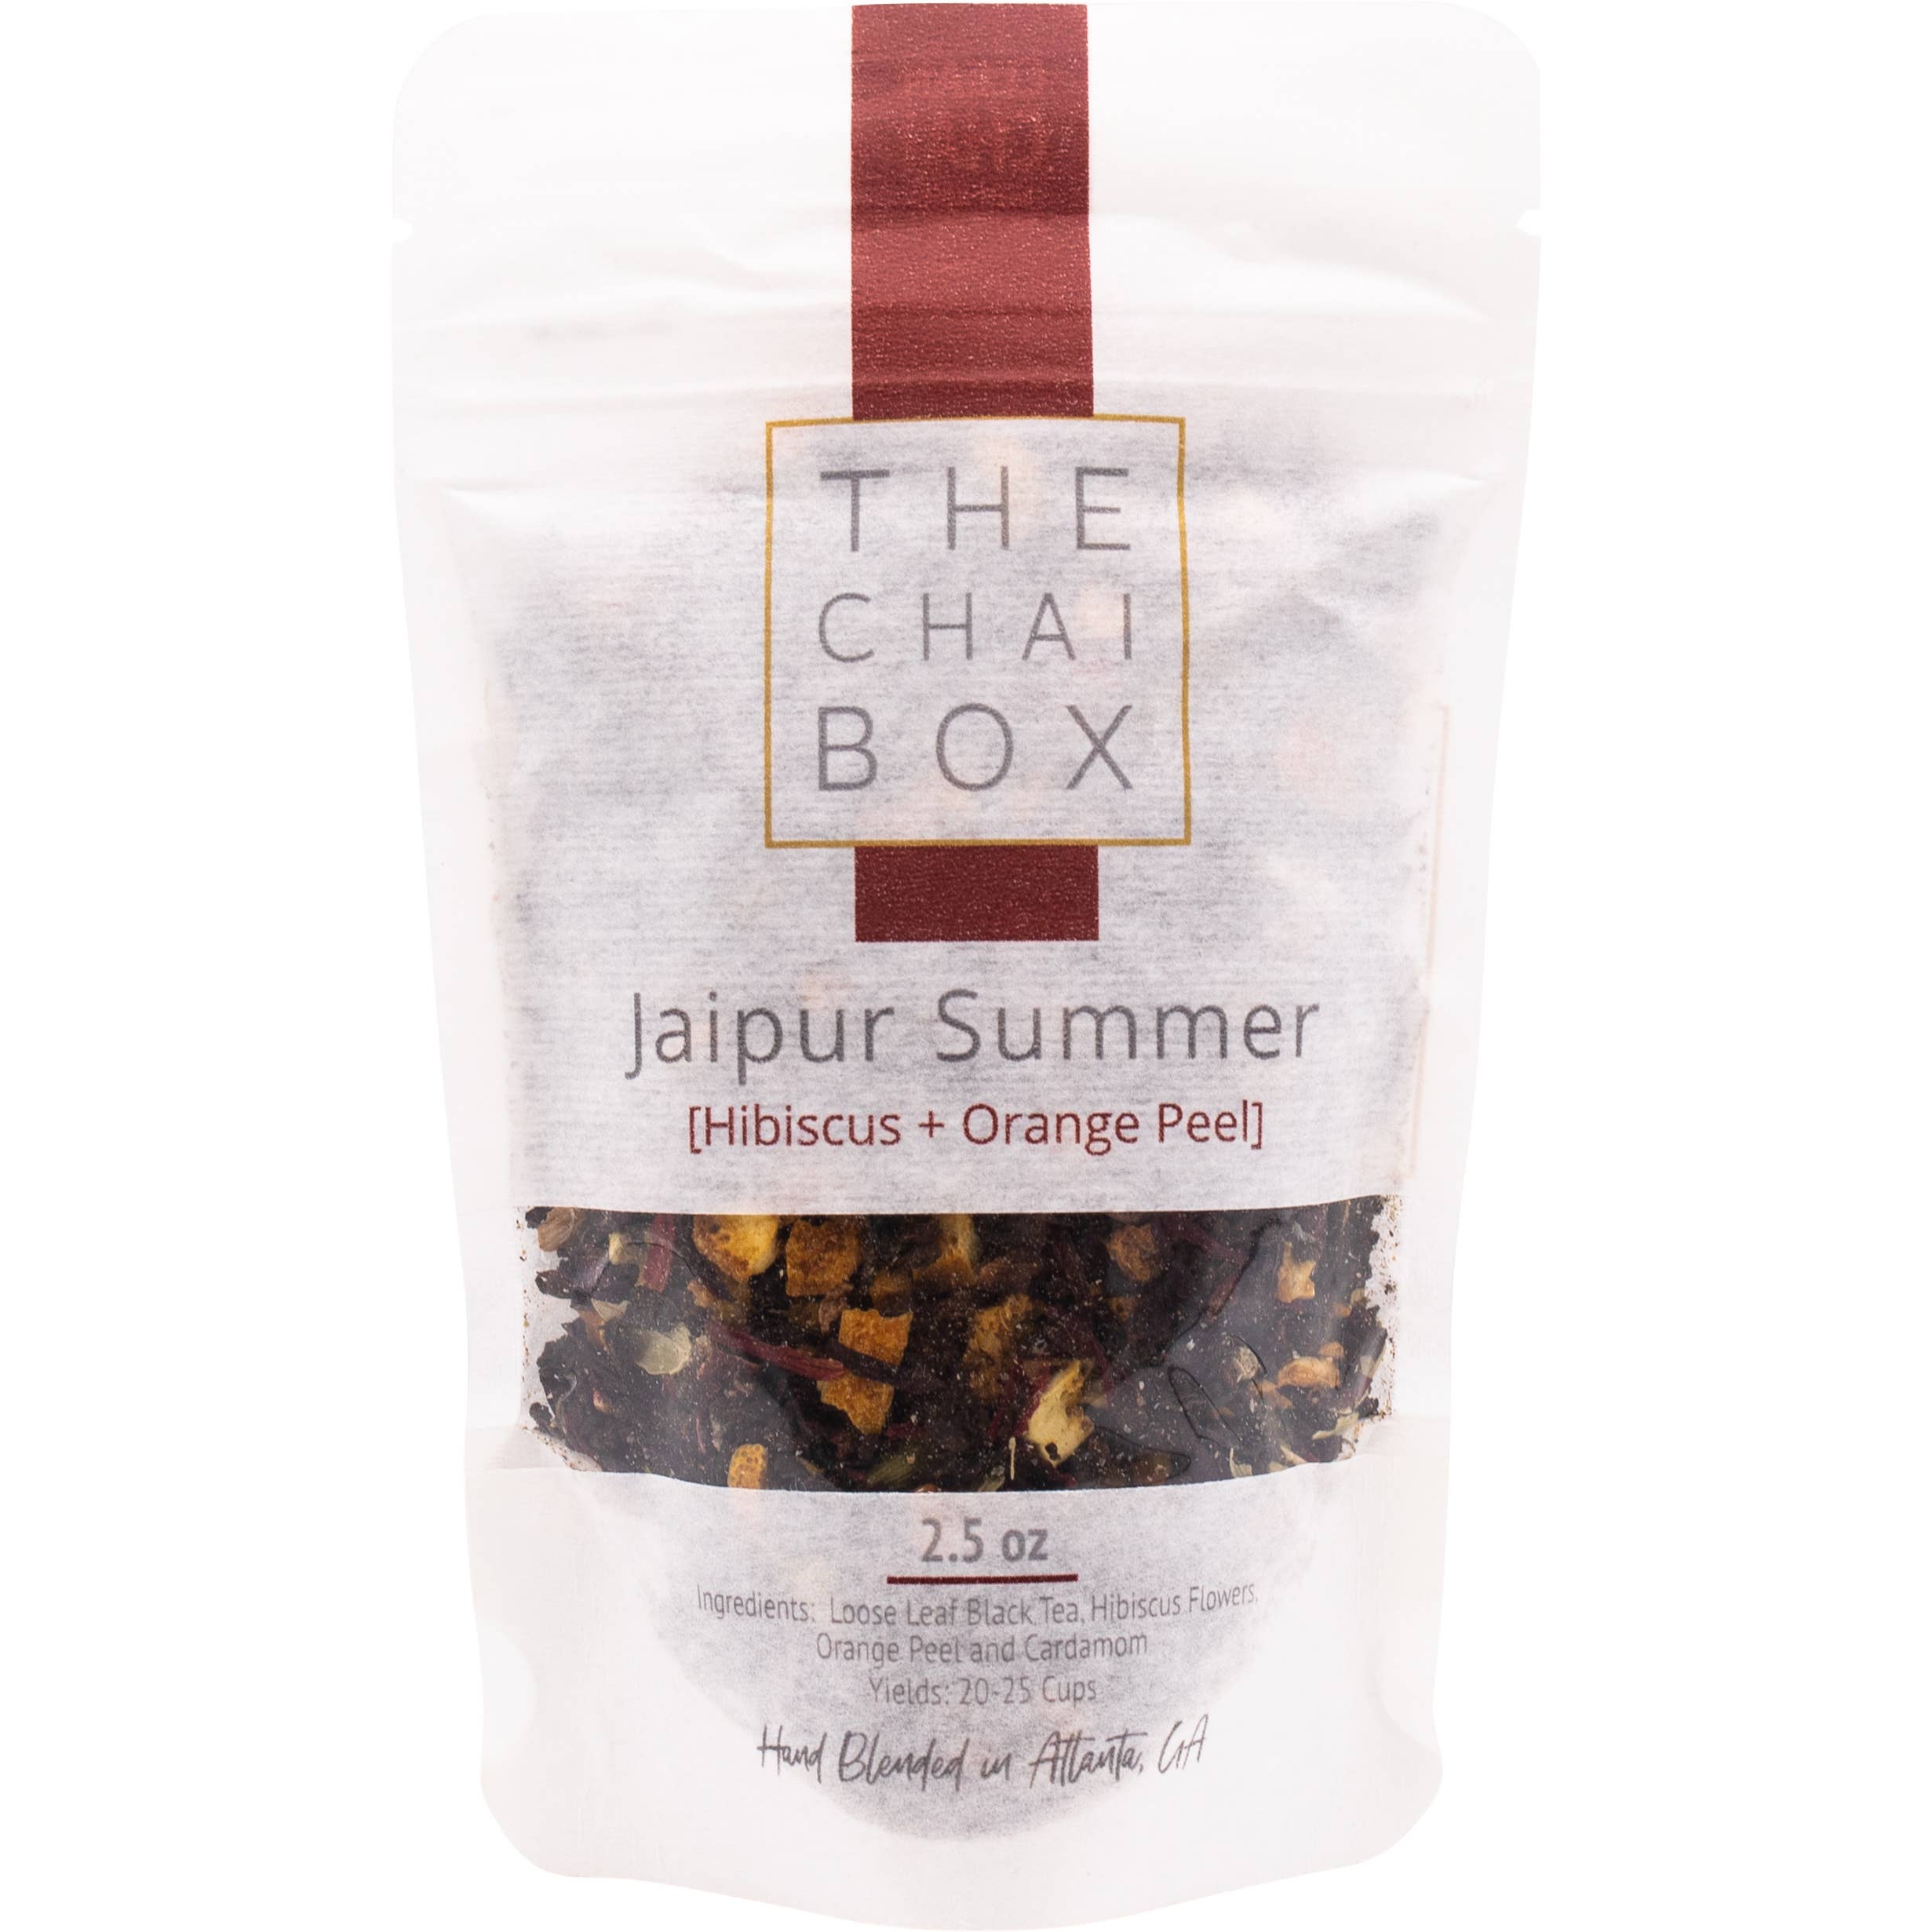 The Chai Box Jaipur Summer in a resealable pouch.